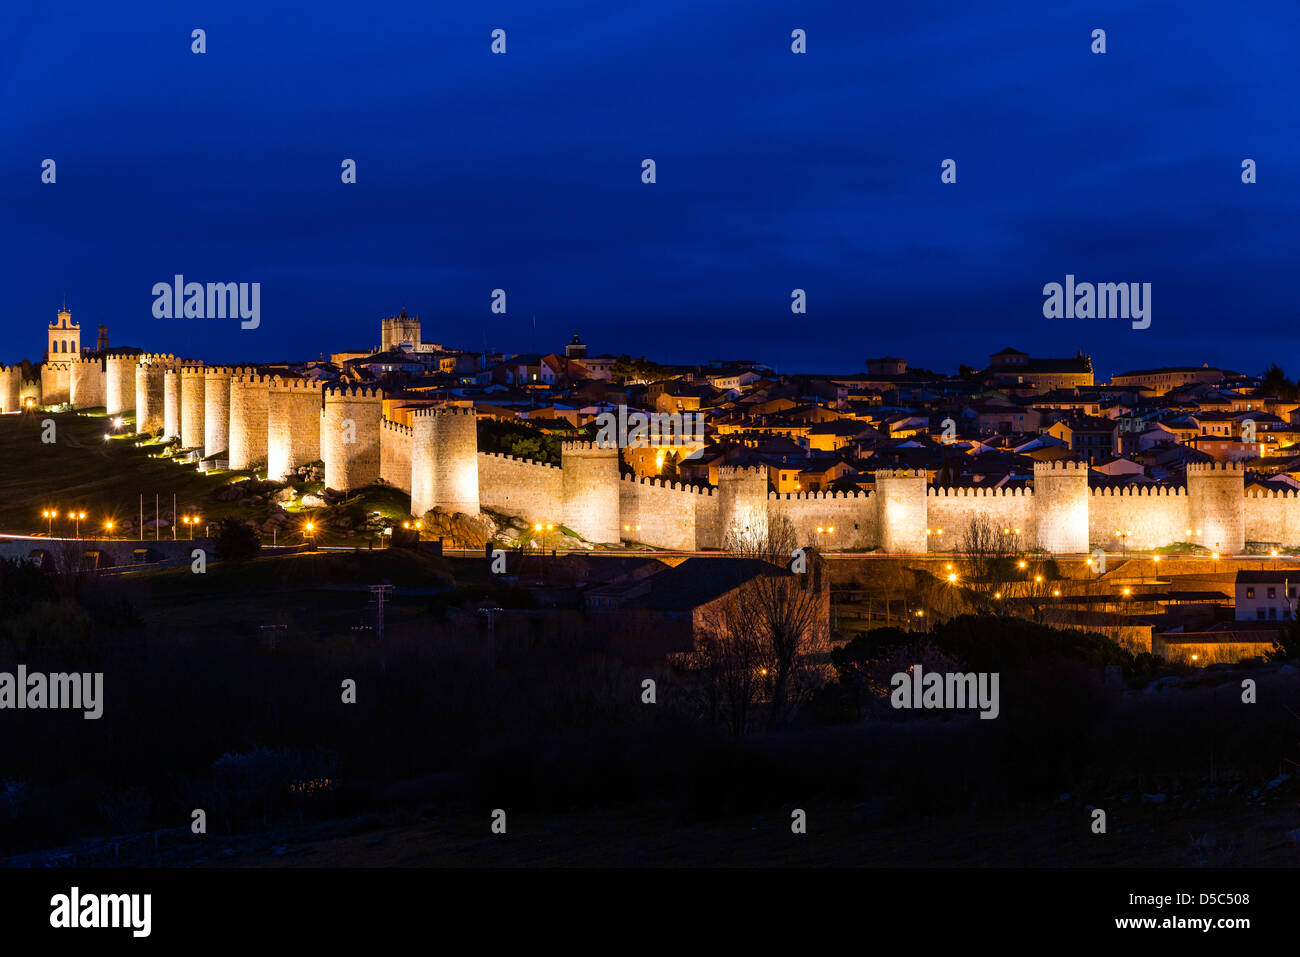 View from Cuatro Postes over the medieval city walls illuminated at night, Avila, Castile and León, Spain Stock Photo